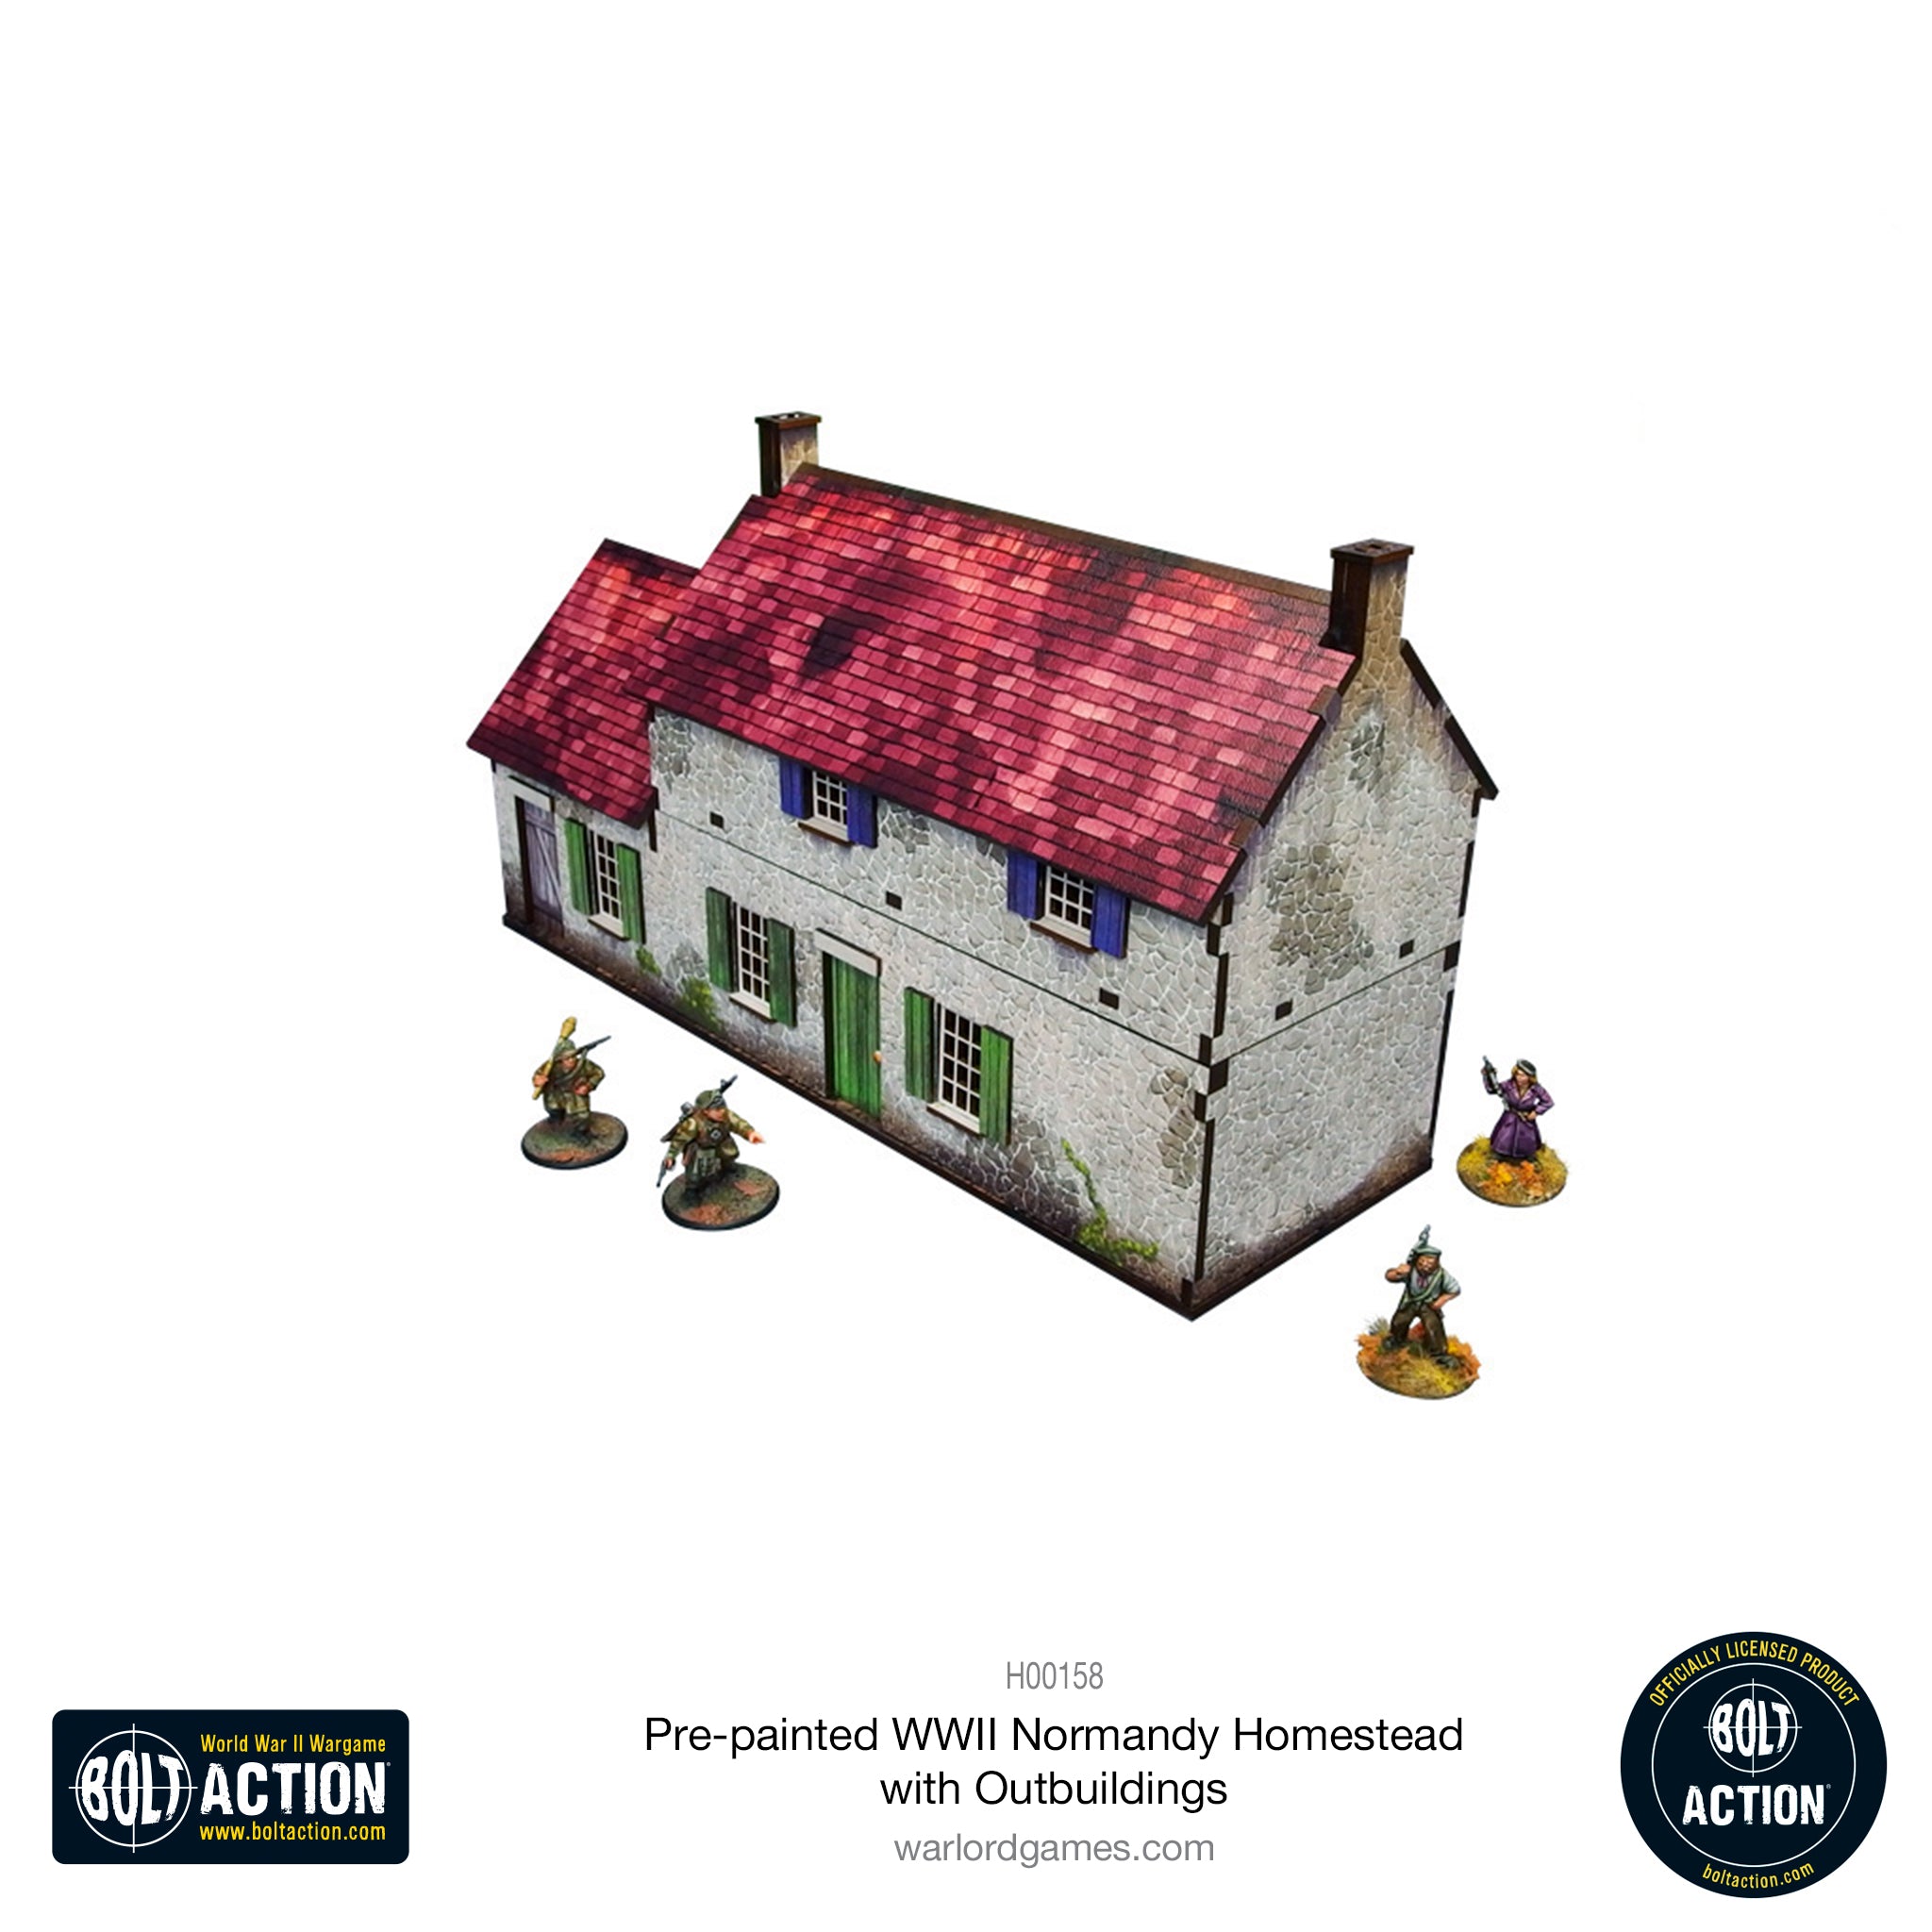 Bolt Action: Pre-painted WWII Normandy Homestead with Outbuildings